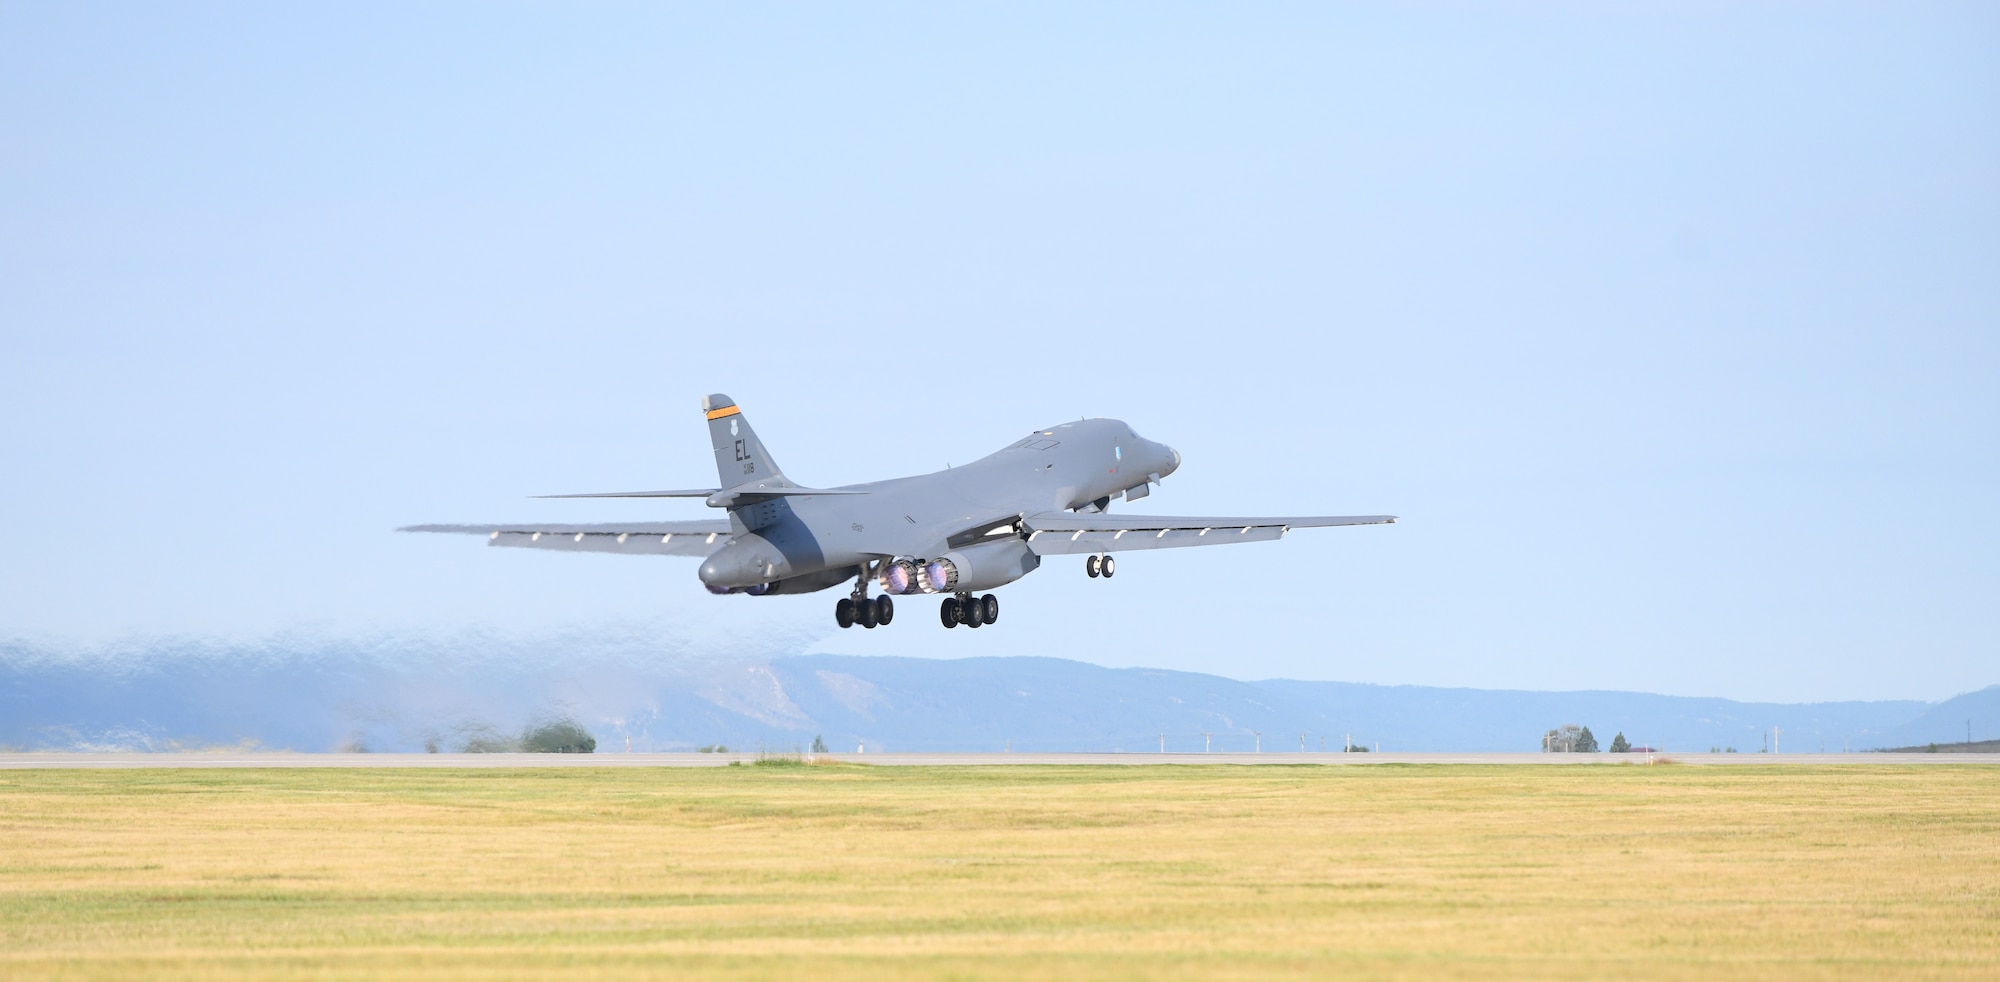 A B-1B Lancer departs from the runway on Ellsworth Air Force Base, S.D., Sept. 10, 2019. Ellsworth AFB is home to the 28th Bomb Wing – the largest B-1 combat wing in the U.S. Air Force. Ellsworth currently has a fleet of 27 B-1B’s. (U.S. Air Force photo by Airman 1st Class Christina Bennett)